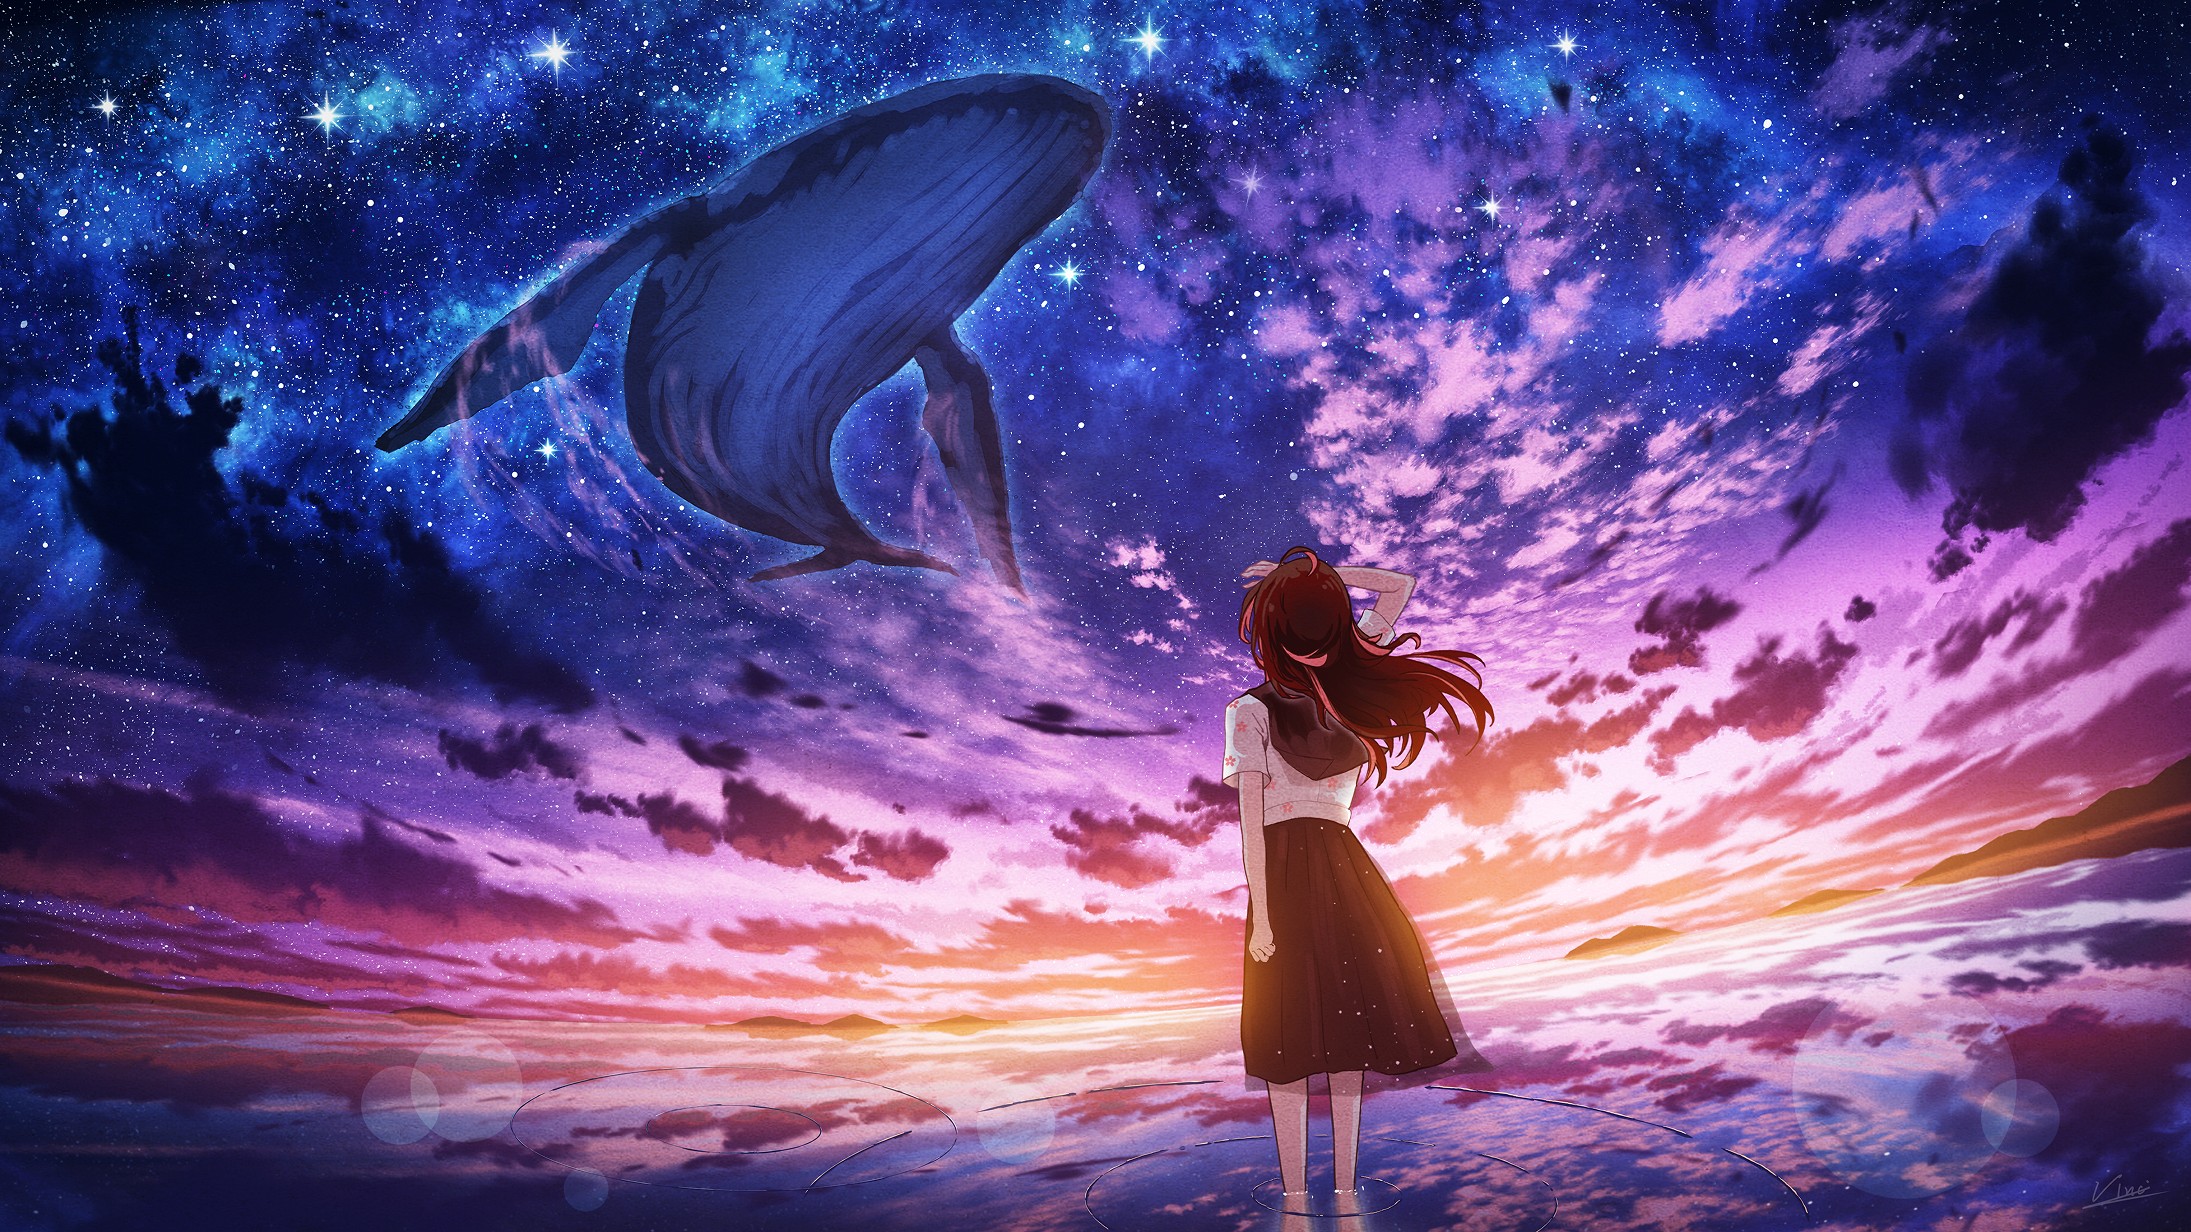 Anime Girls Flying Whales Rear View Starred Sky Standing In Water Water Sunset Sunset Glow Looking A 2191x1232